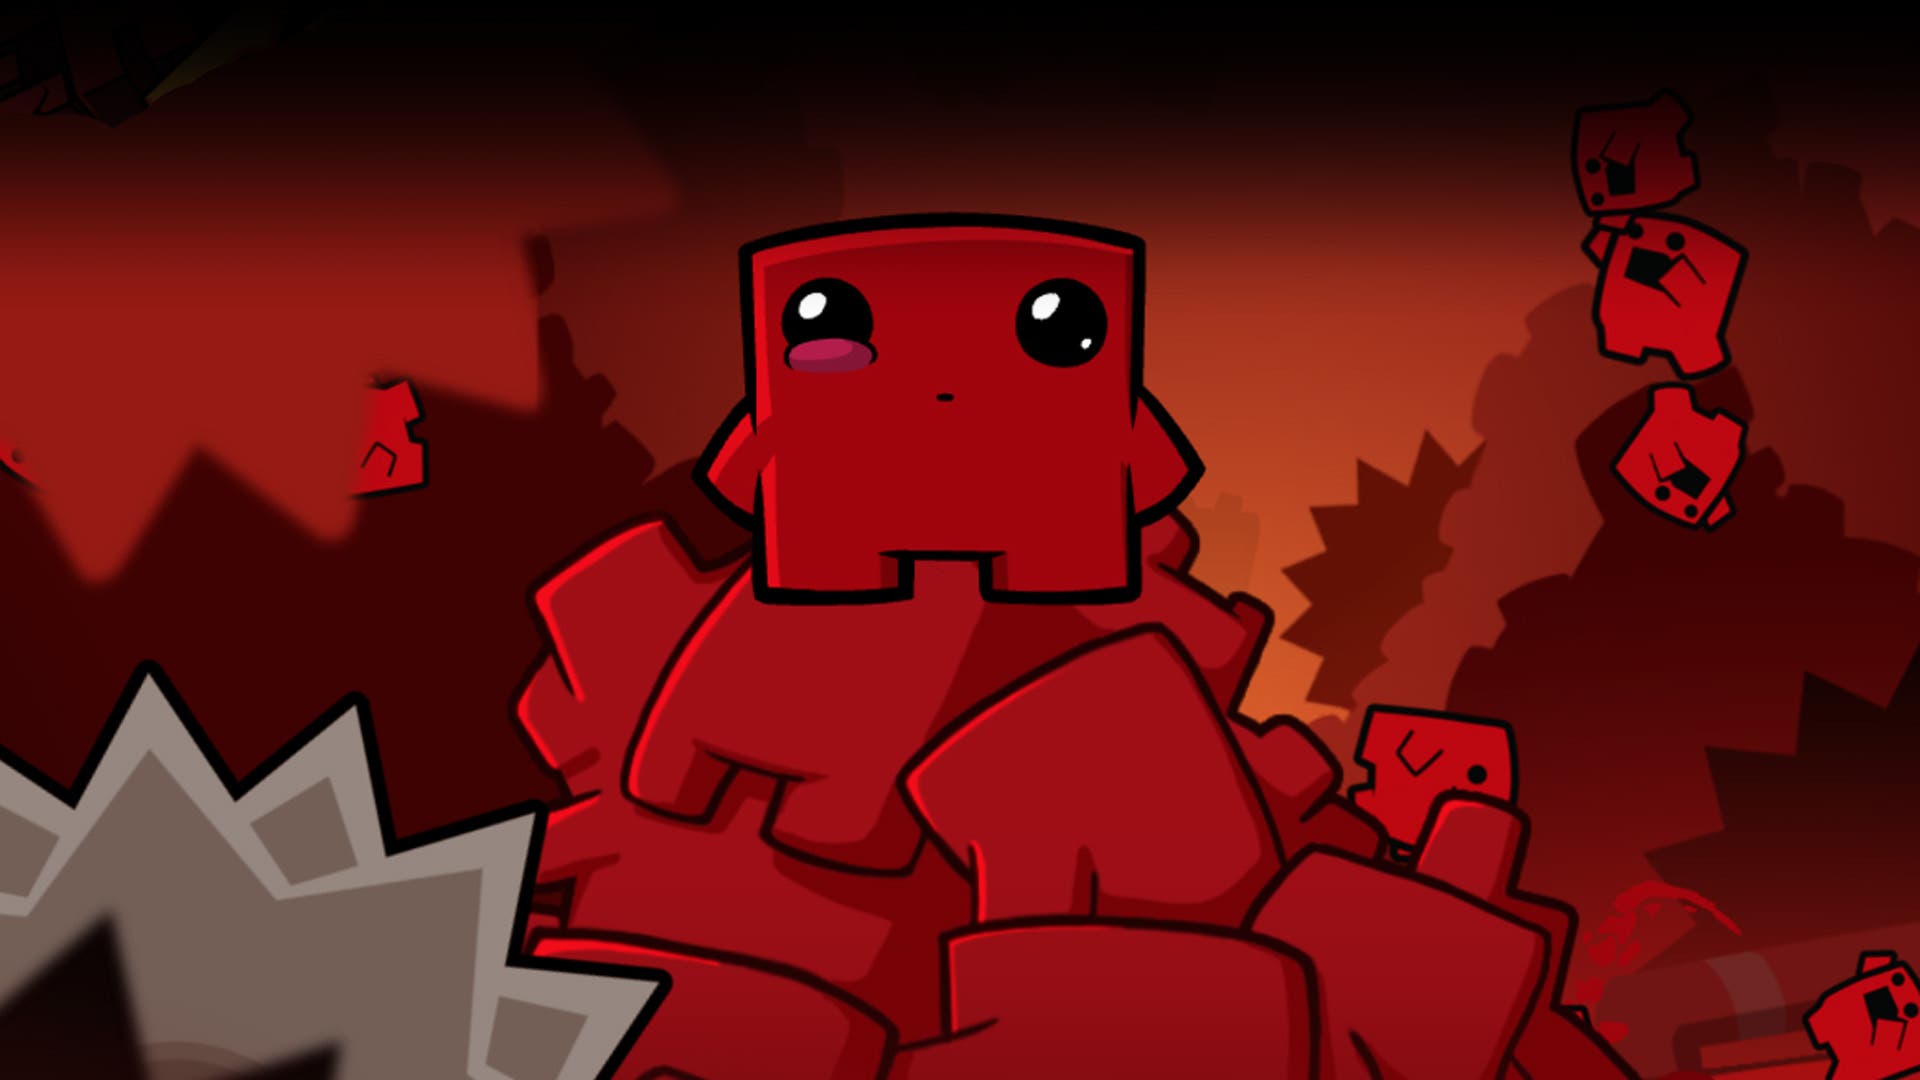 super meat boy forever xbox one release date